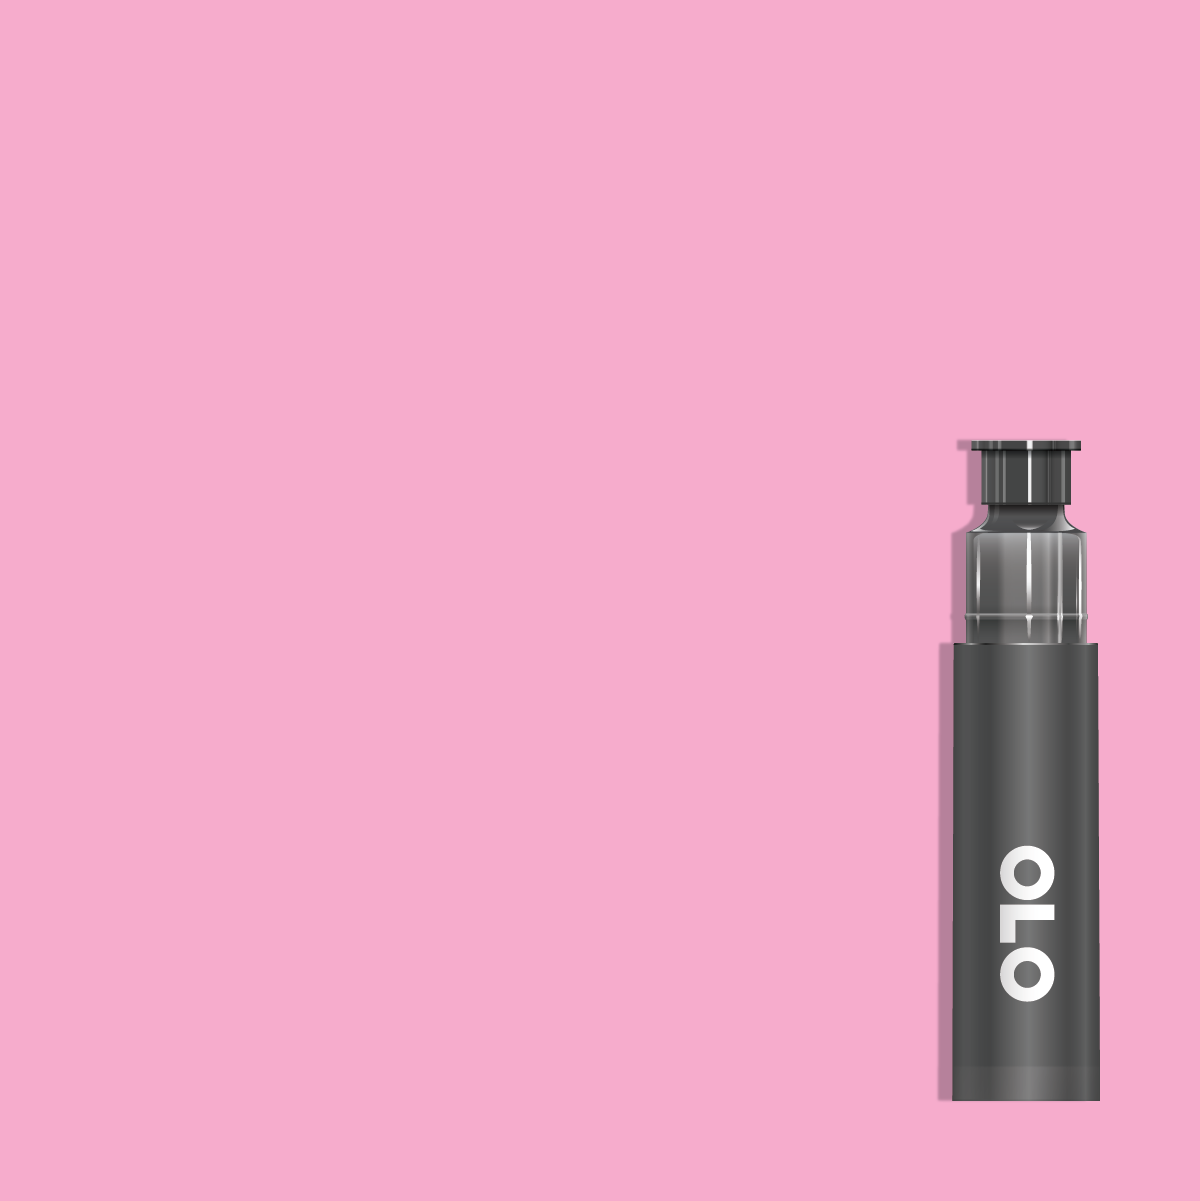 OLO RV0.1 Cotton Candy Replacement Cartridge